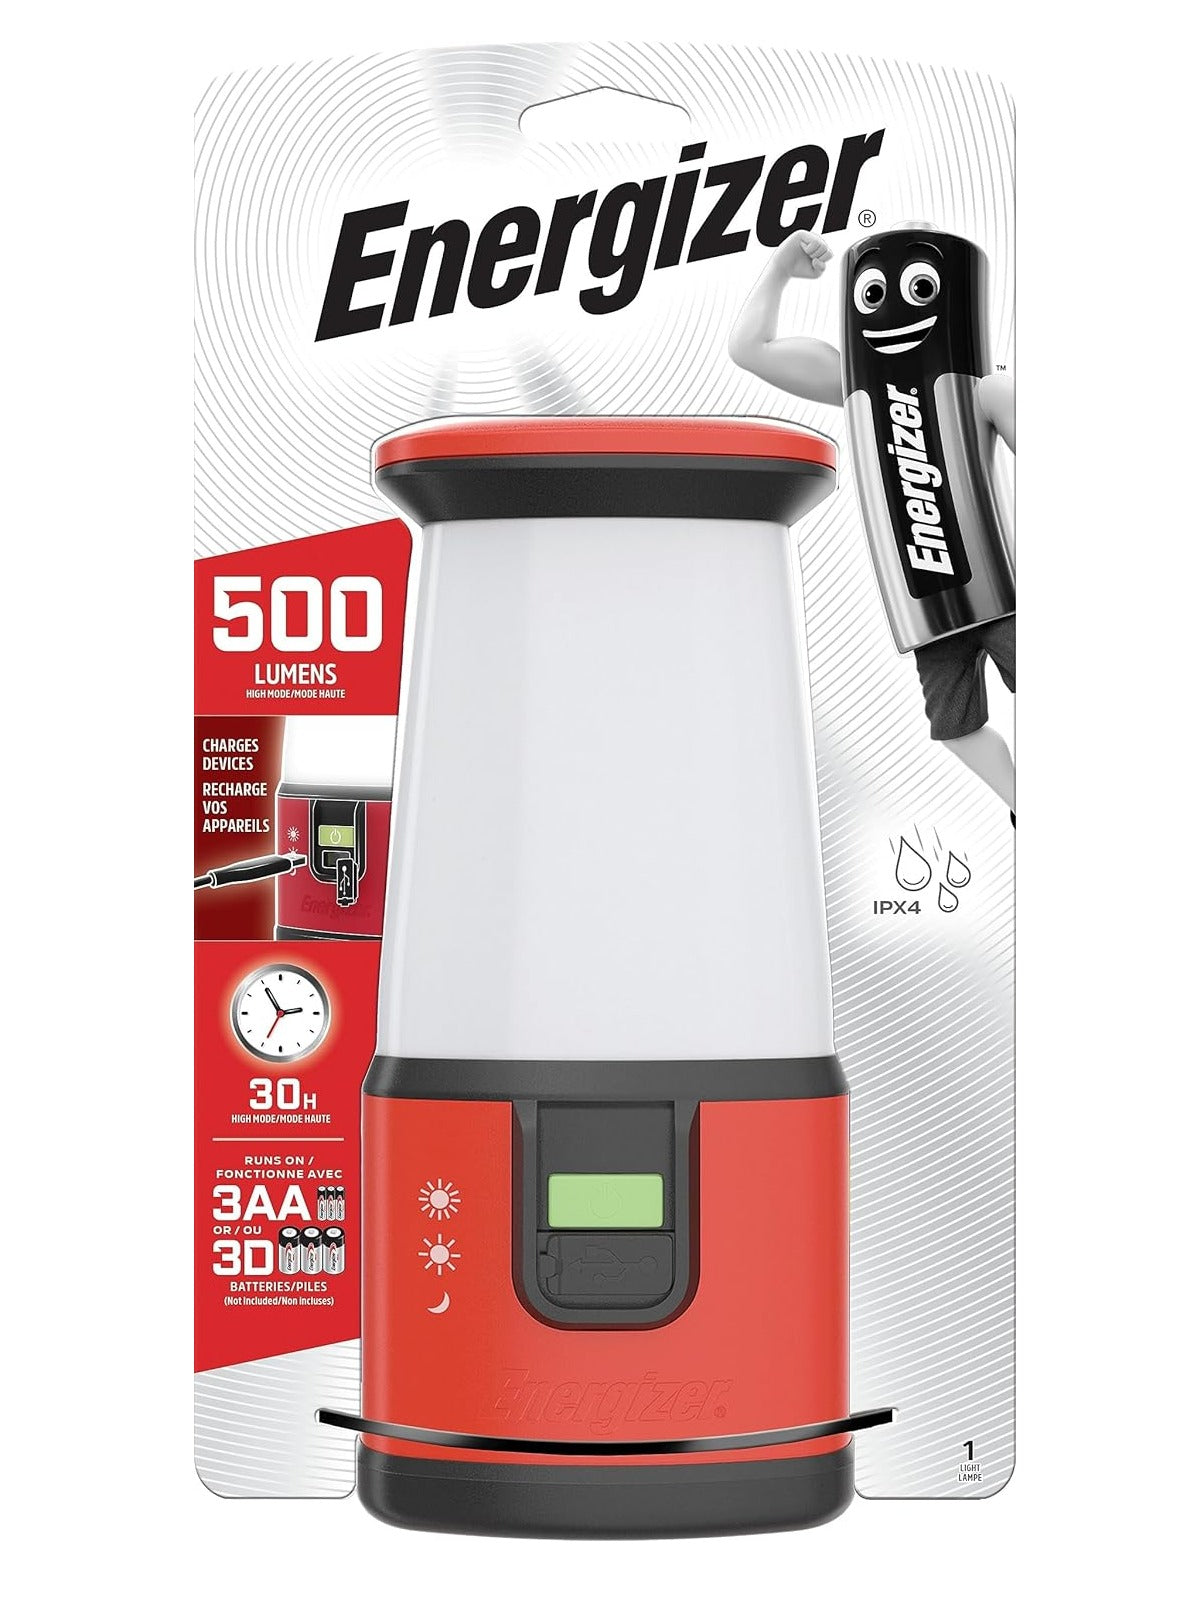 Energizer LED Camping Lantern Highly visible switch that lights up at night provides quick access to three light modes